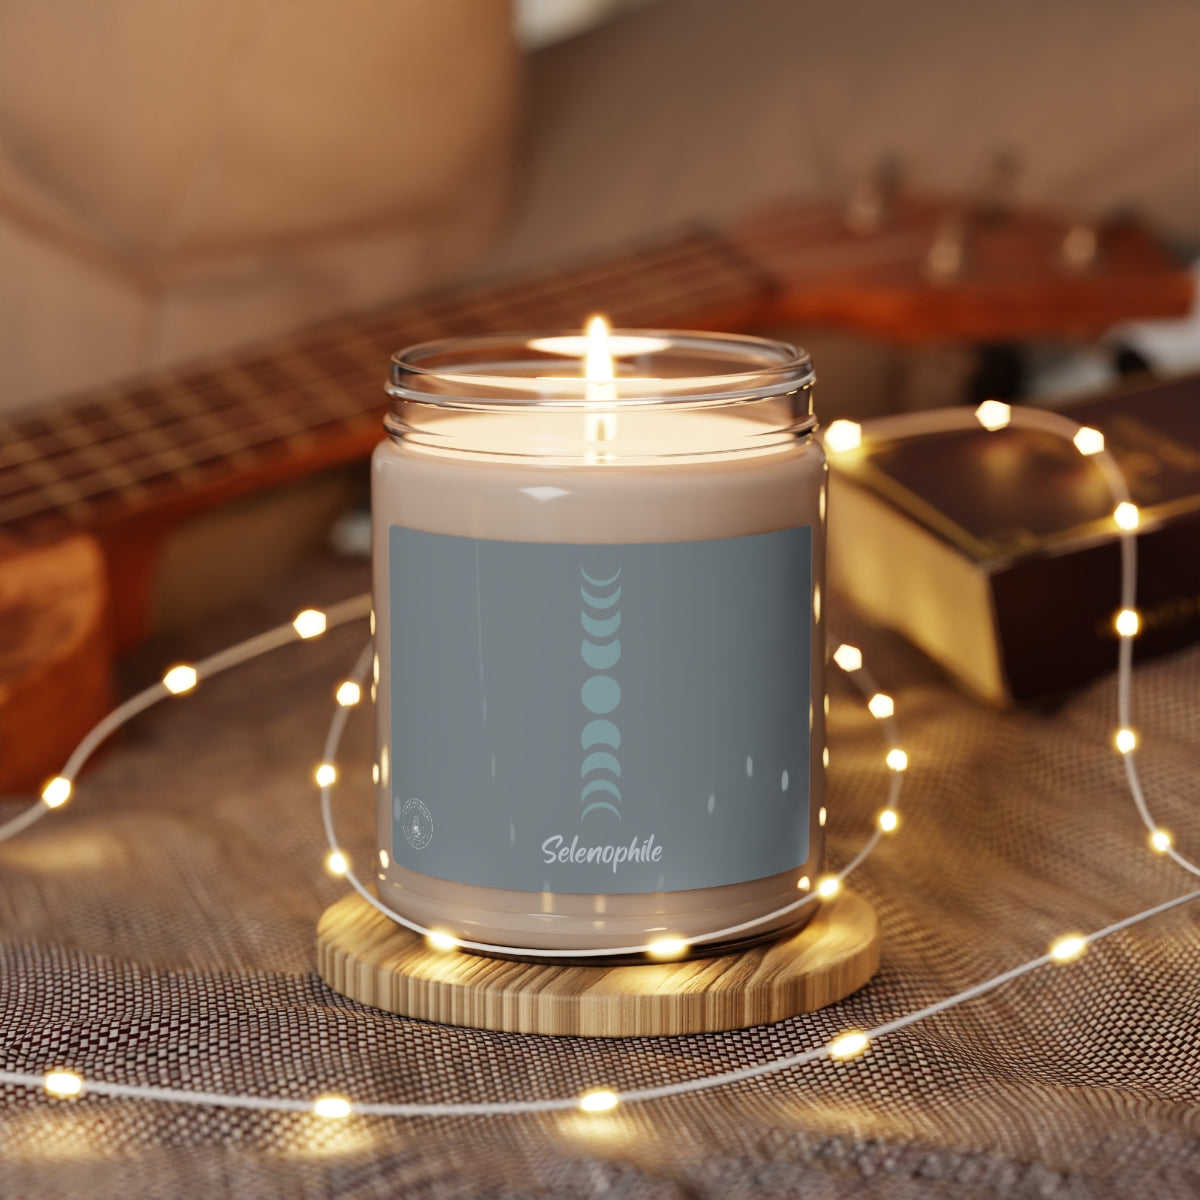 Healing Candles - Selenophile  3